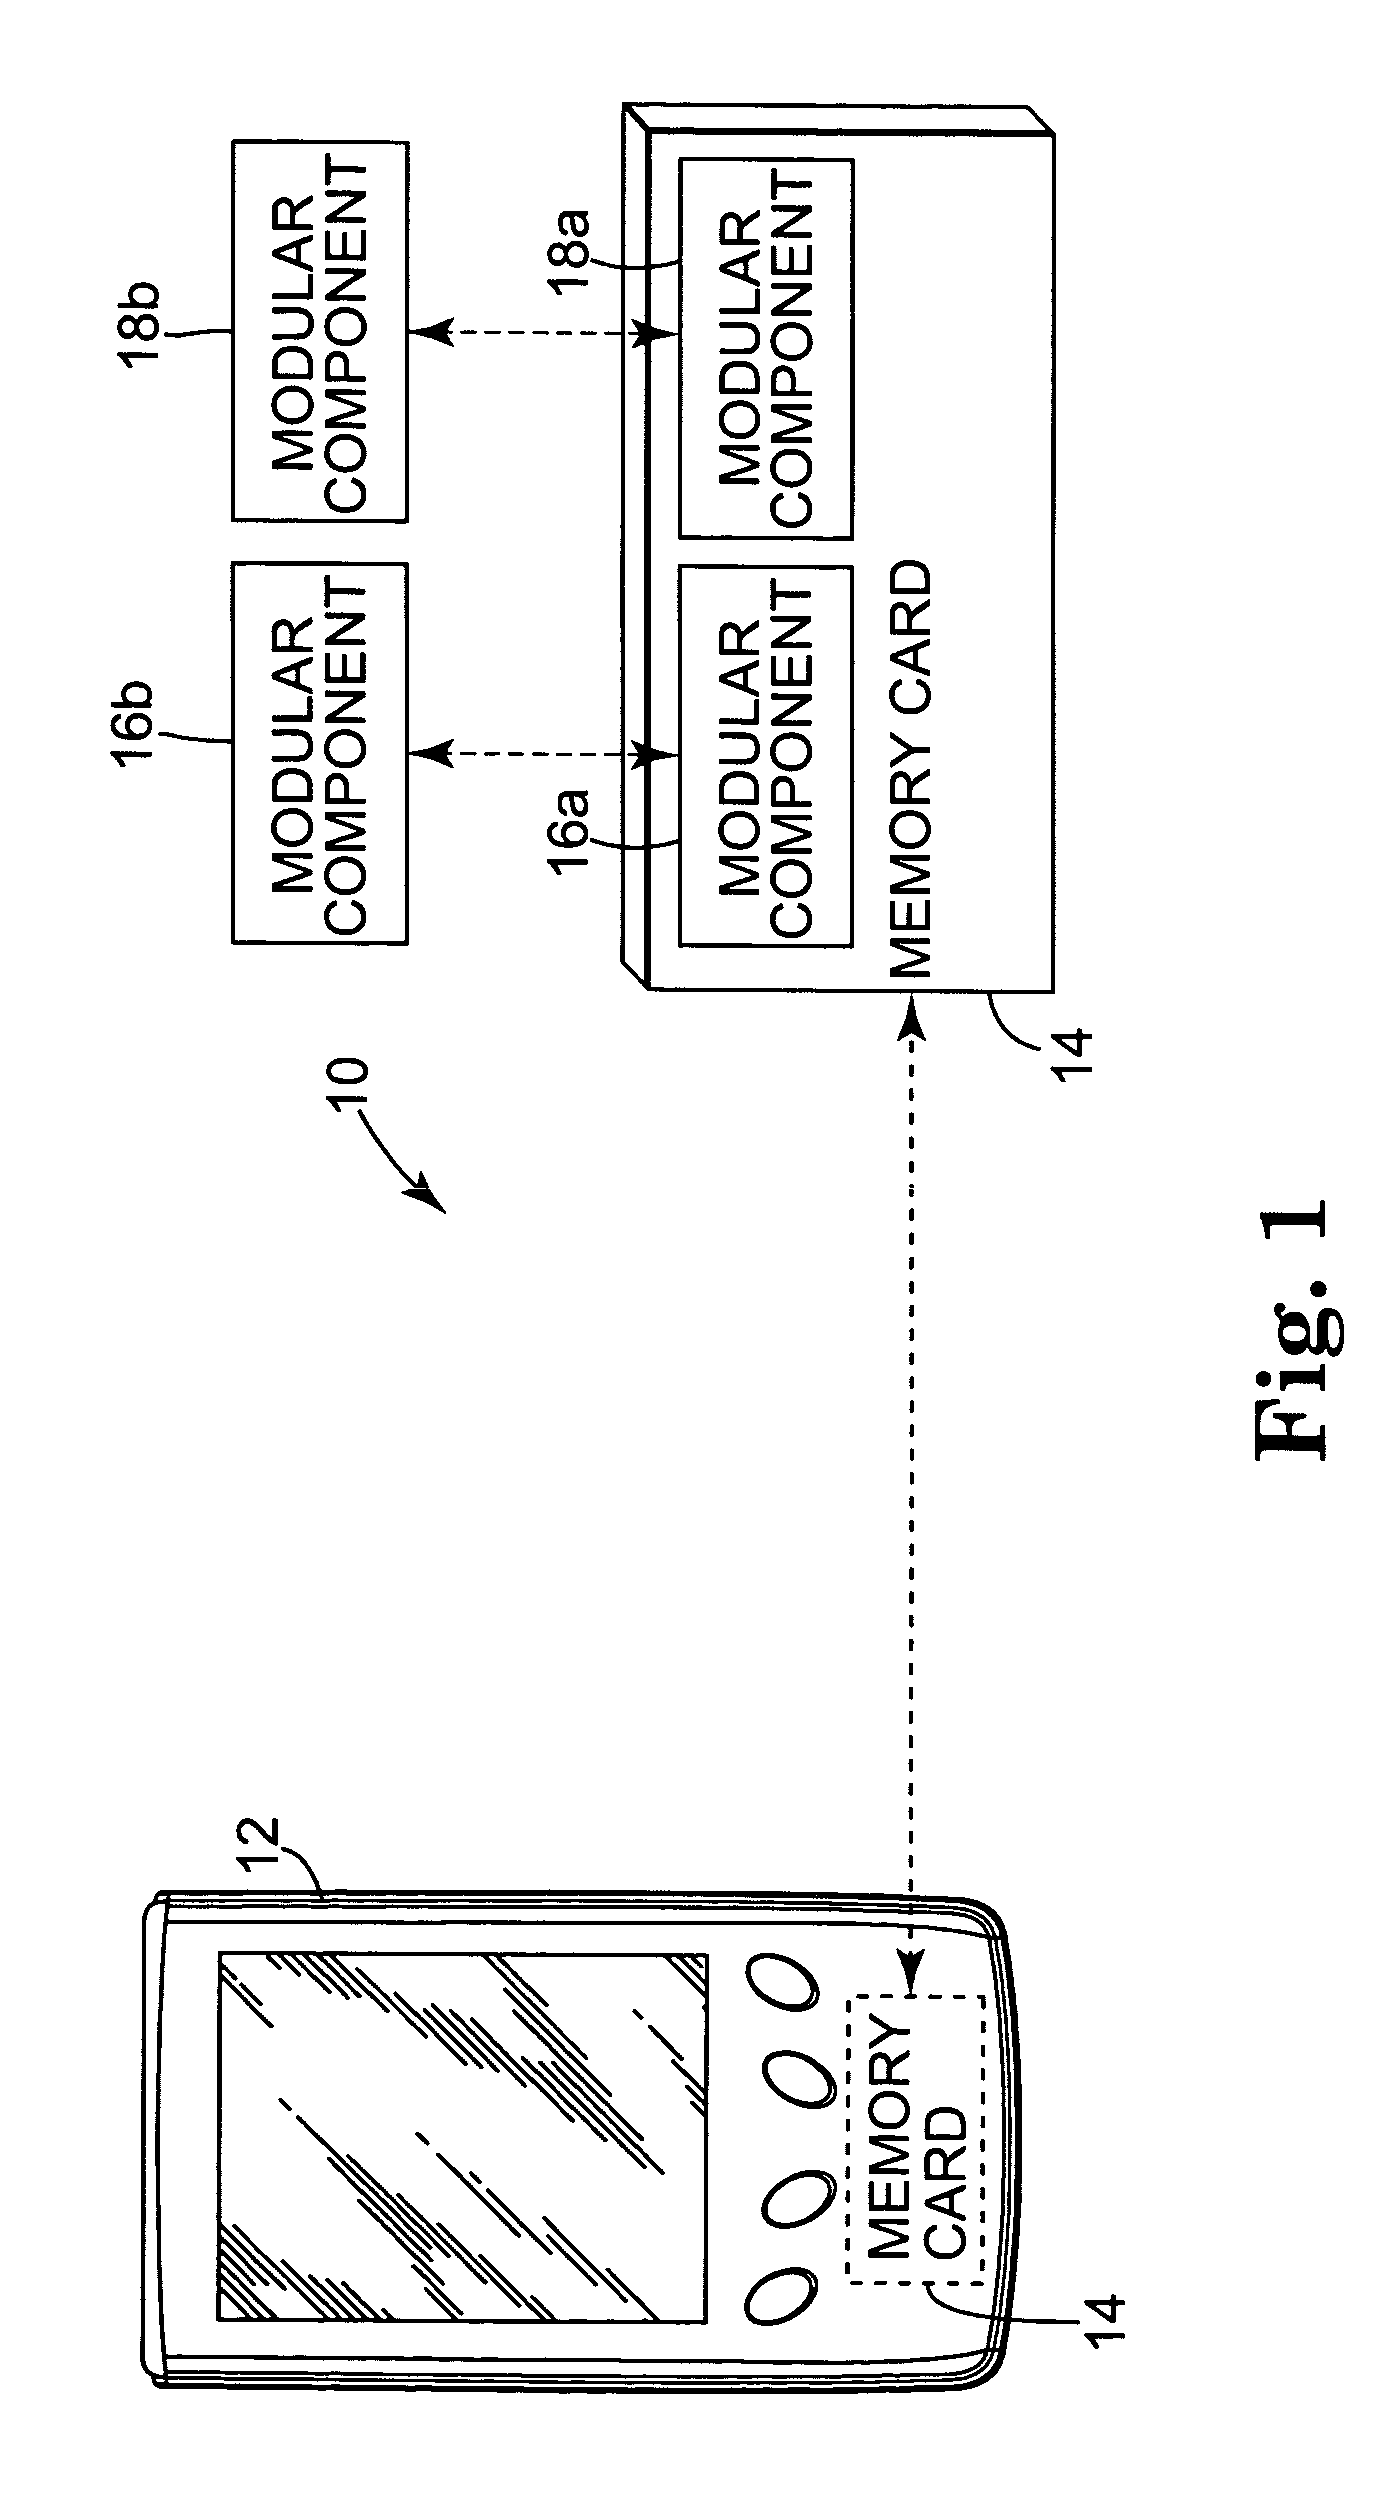 Memory card having a processor coupled between host interface and second interface wherein internal storage code provides a generic interface between host interface and processor